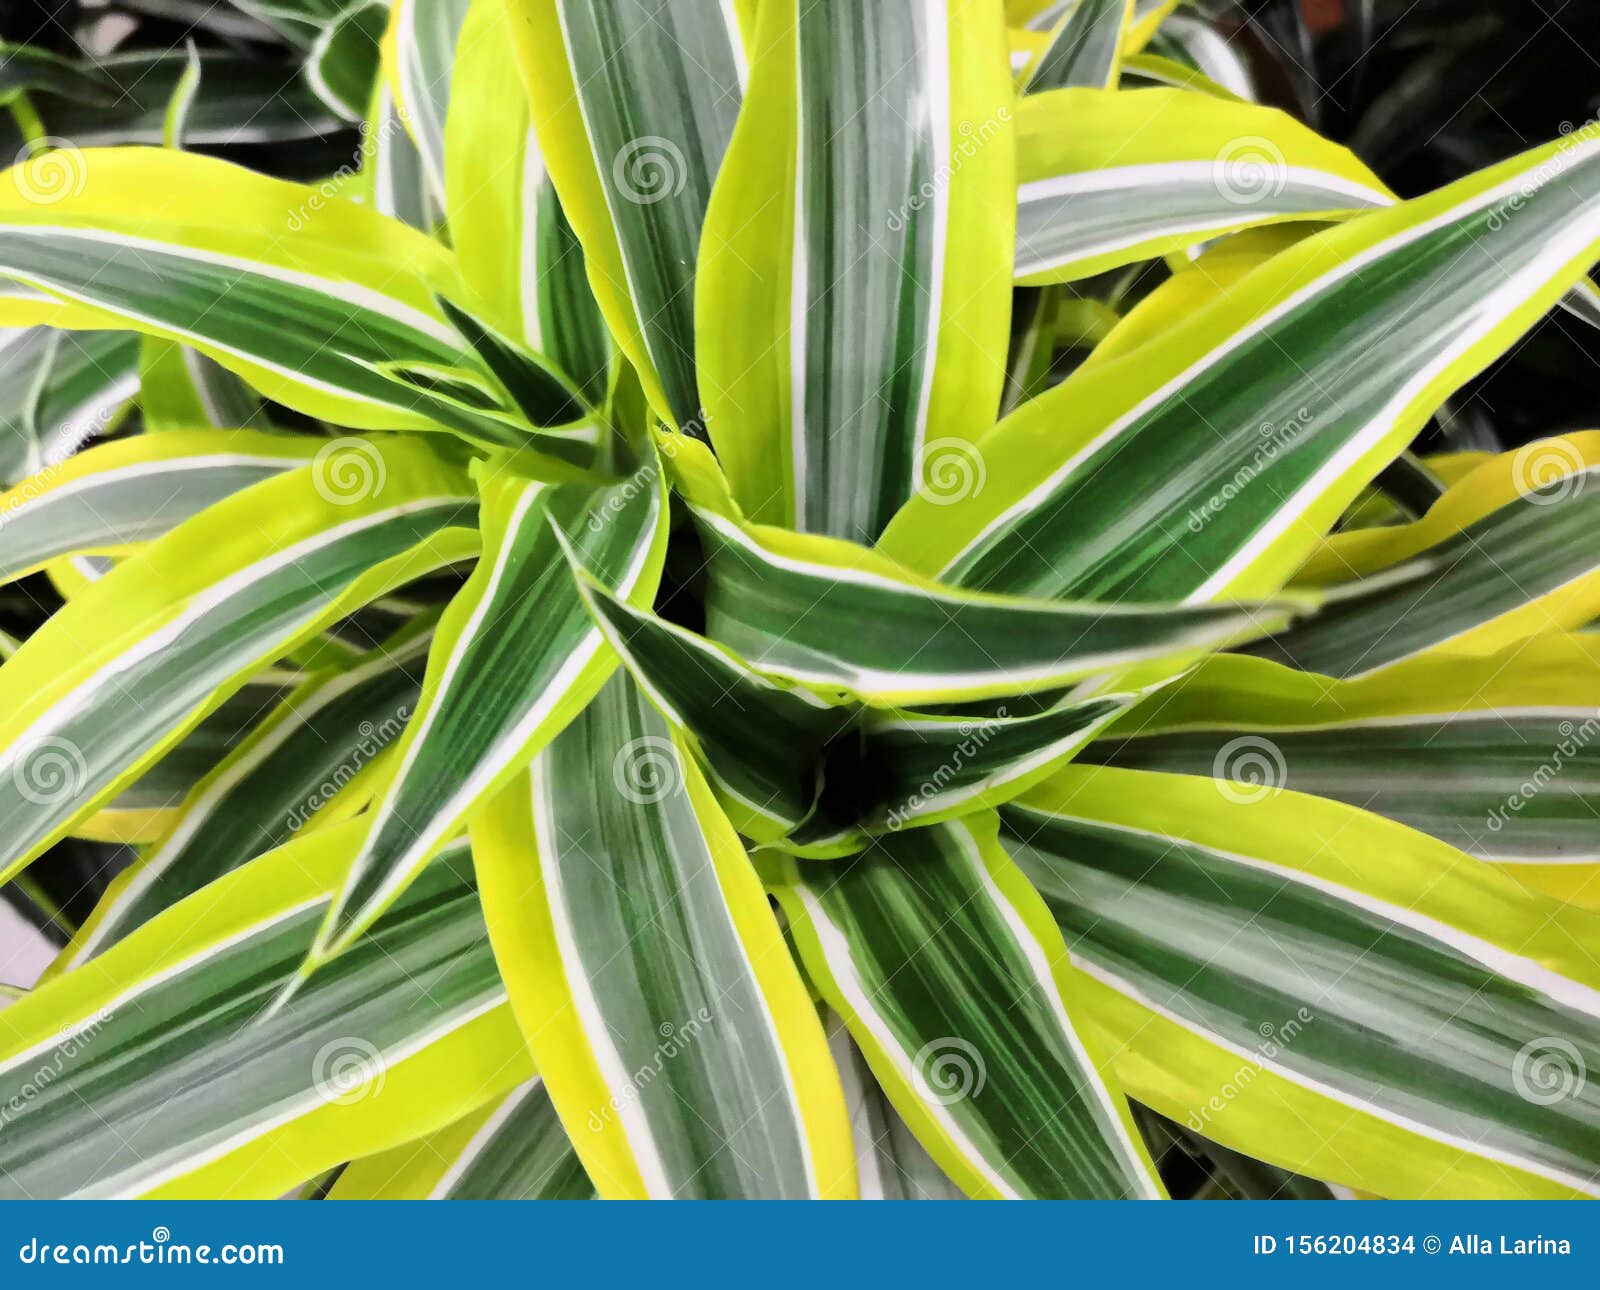 Striped green yellow indoor plant